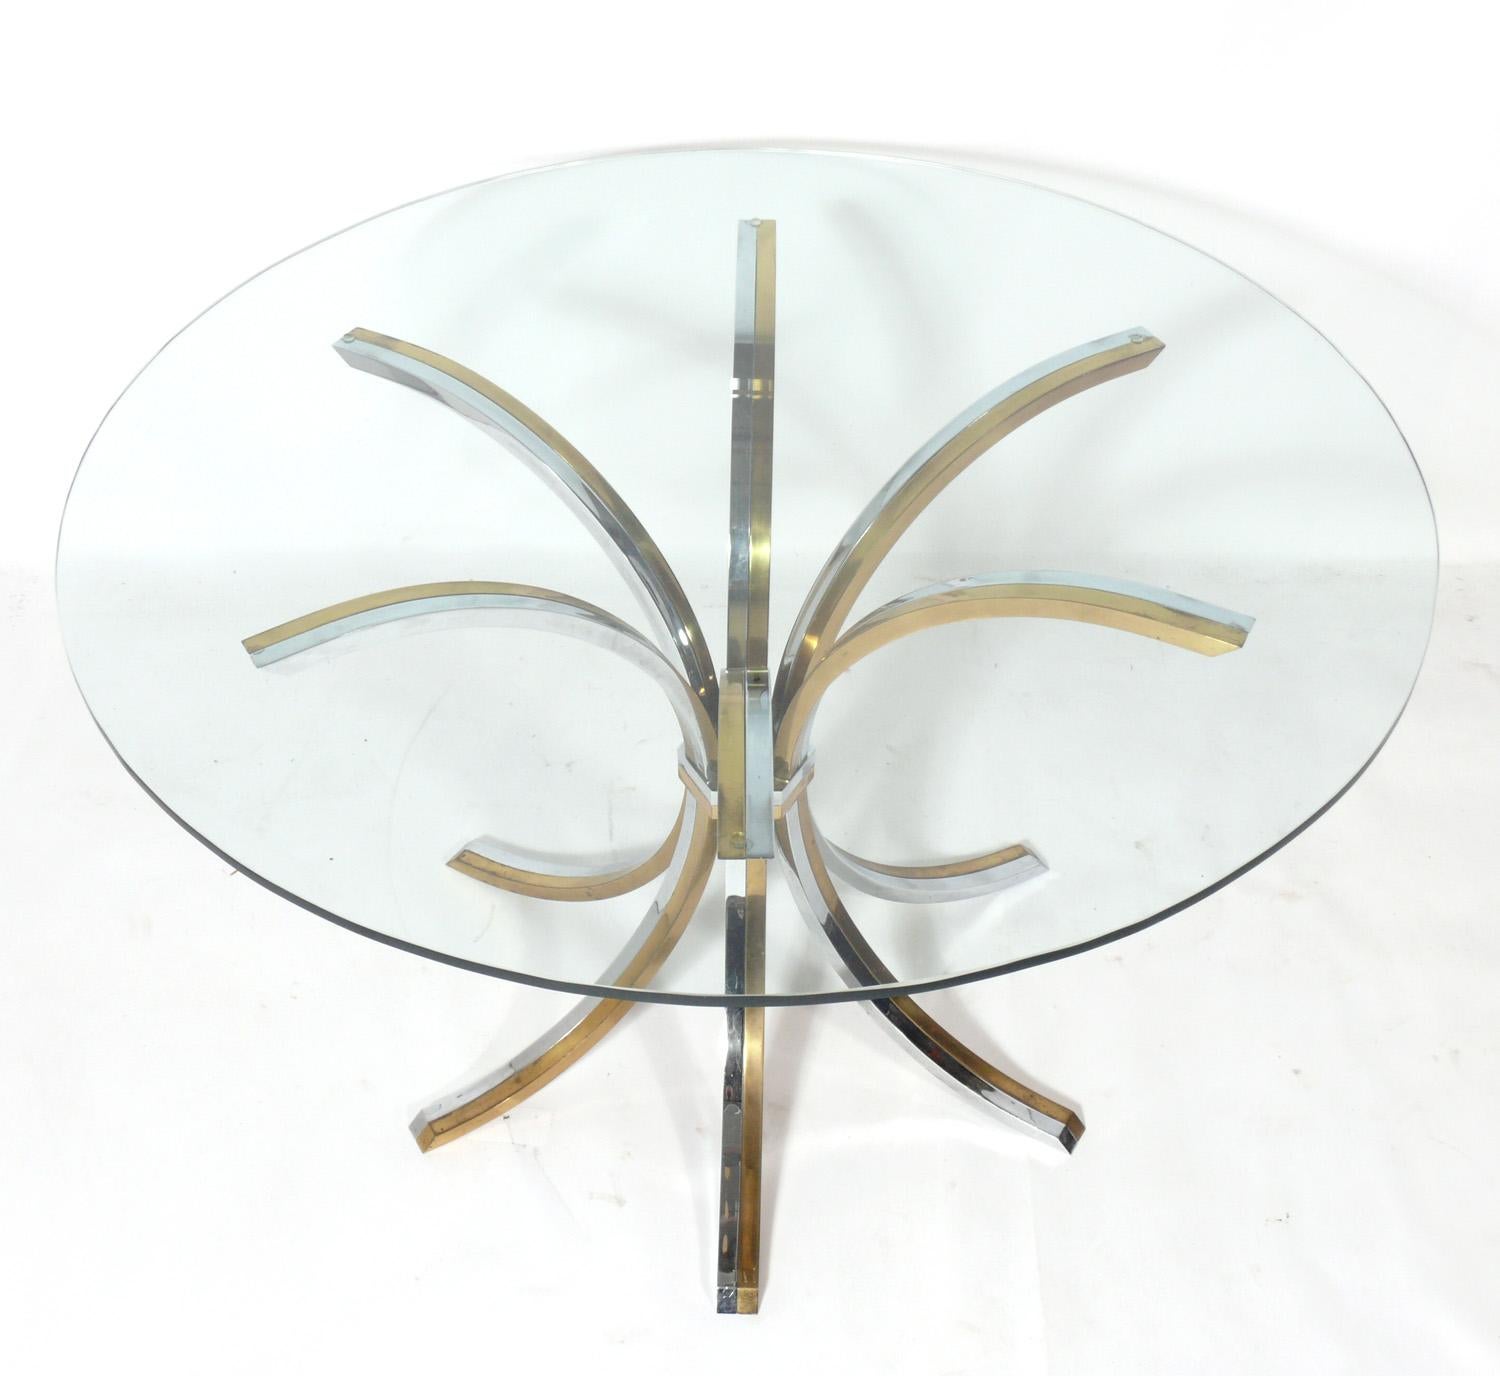 Brass and chrome center or dining table, attributed to Willy Rizzo, Italy, circa 1960s.